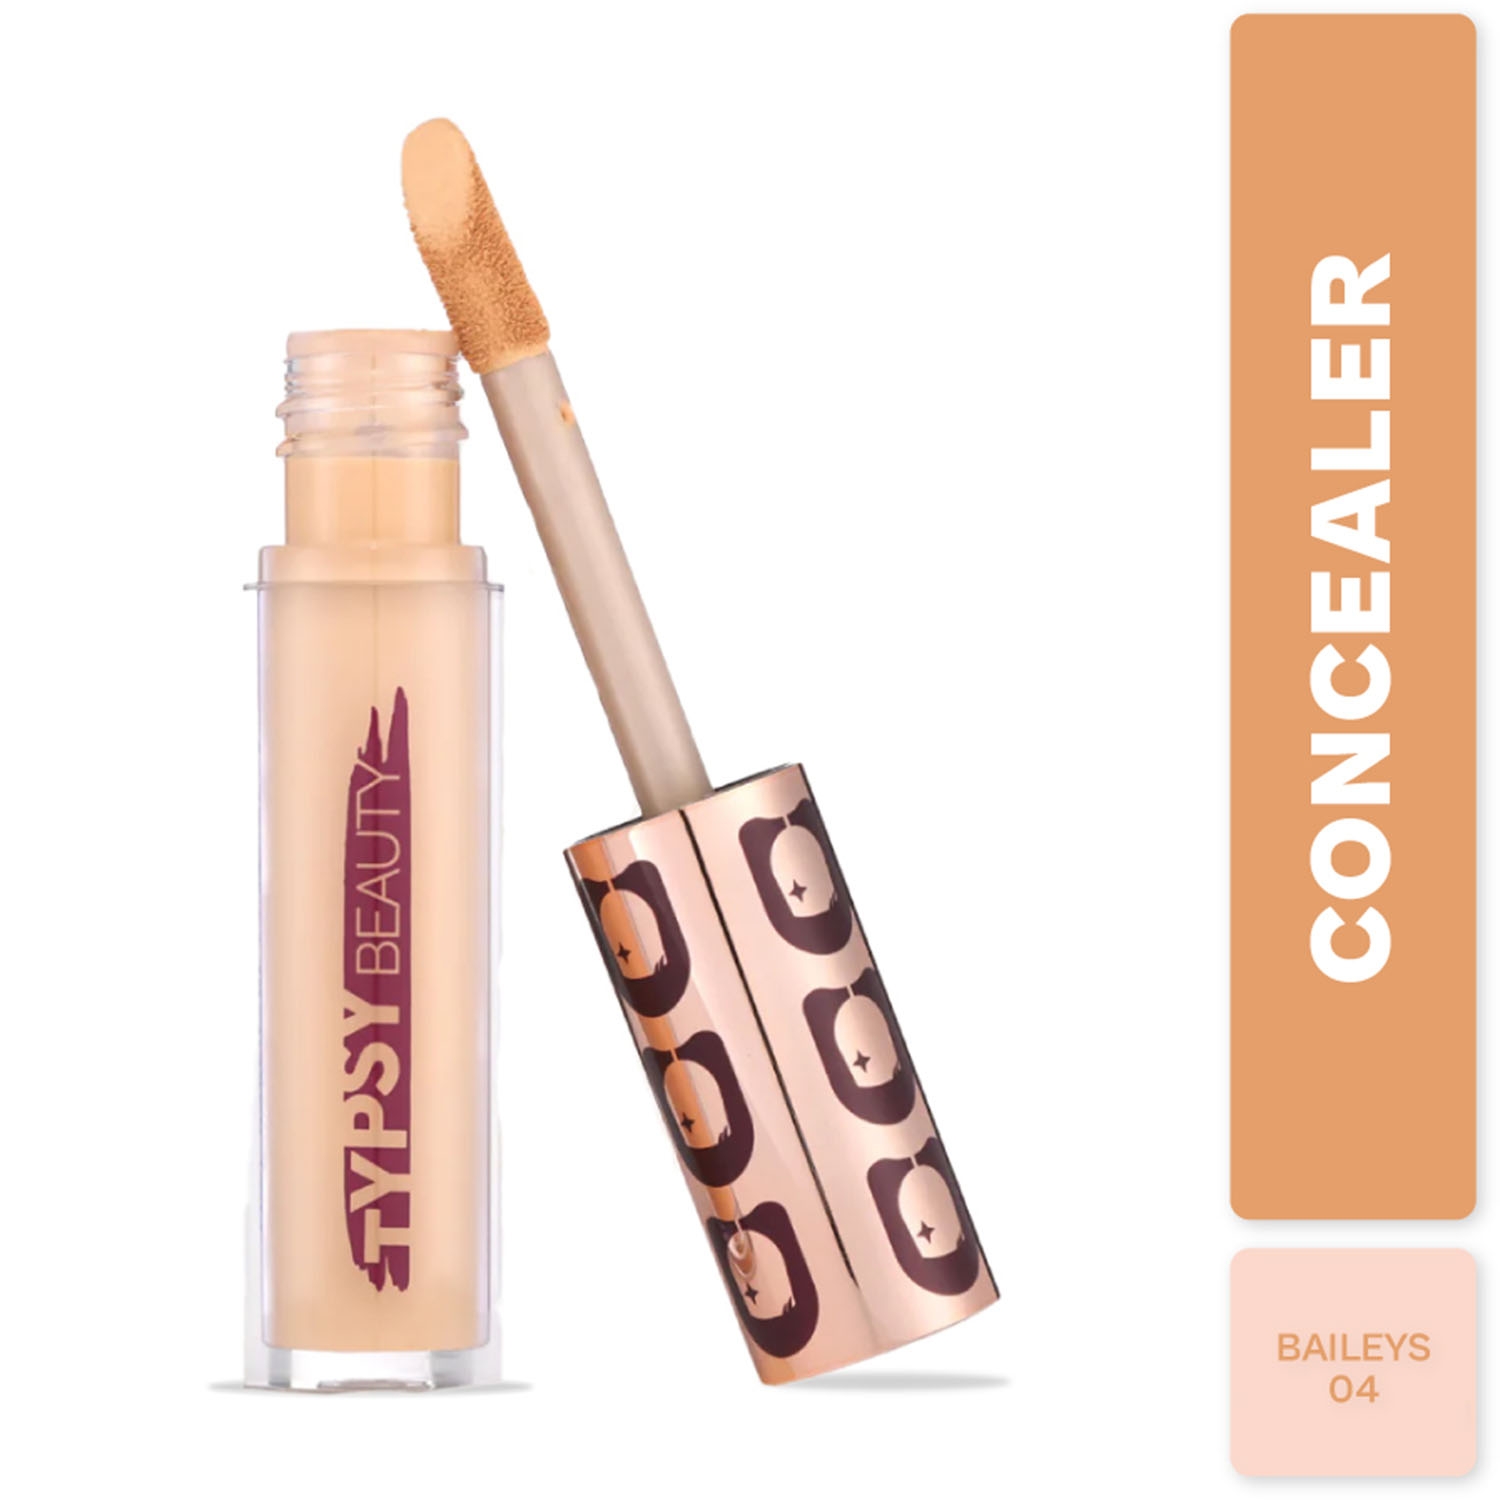 Typsy Beauty | Typsy Beauty Hangover Proof Full Coverage Concealer - 04 Baileys (5.8g)